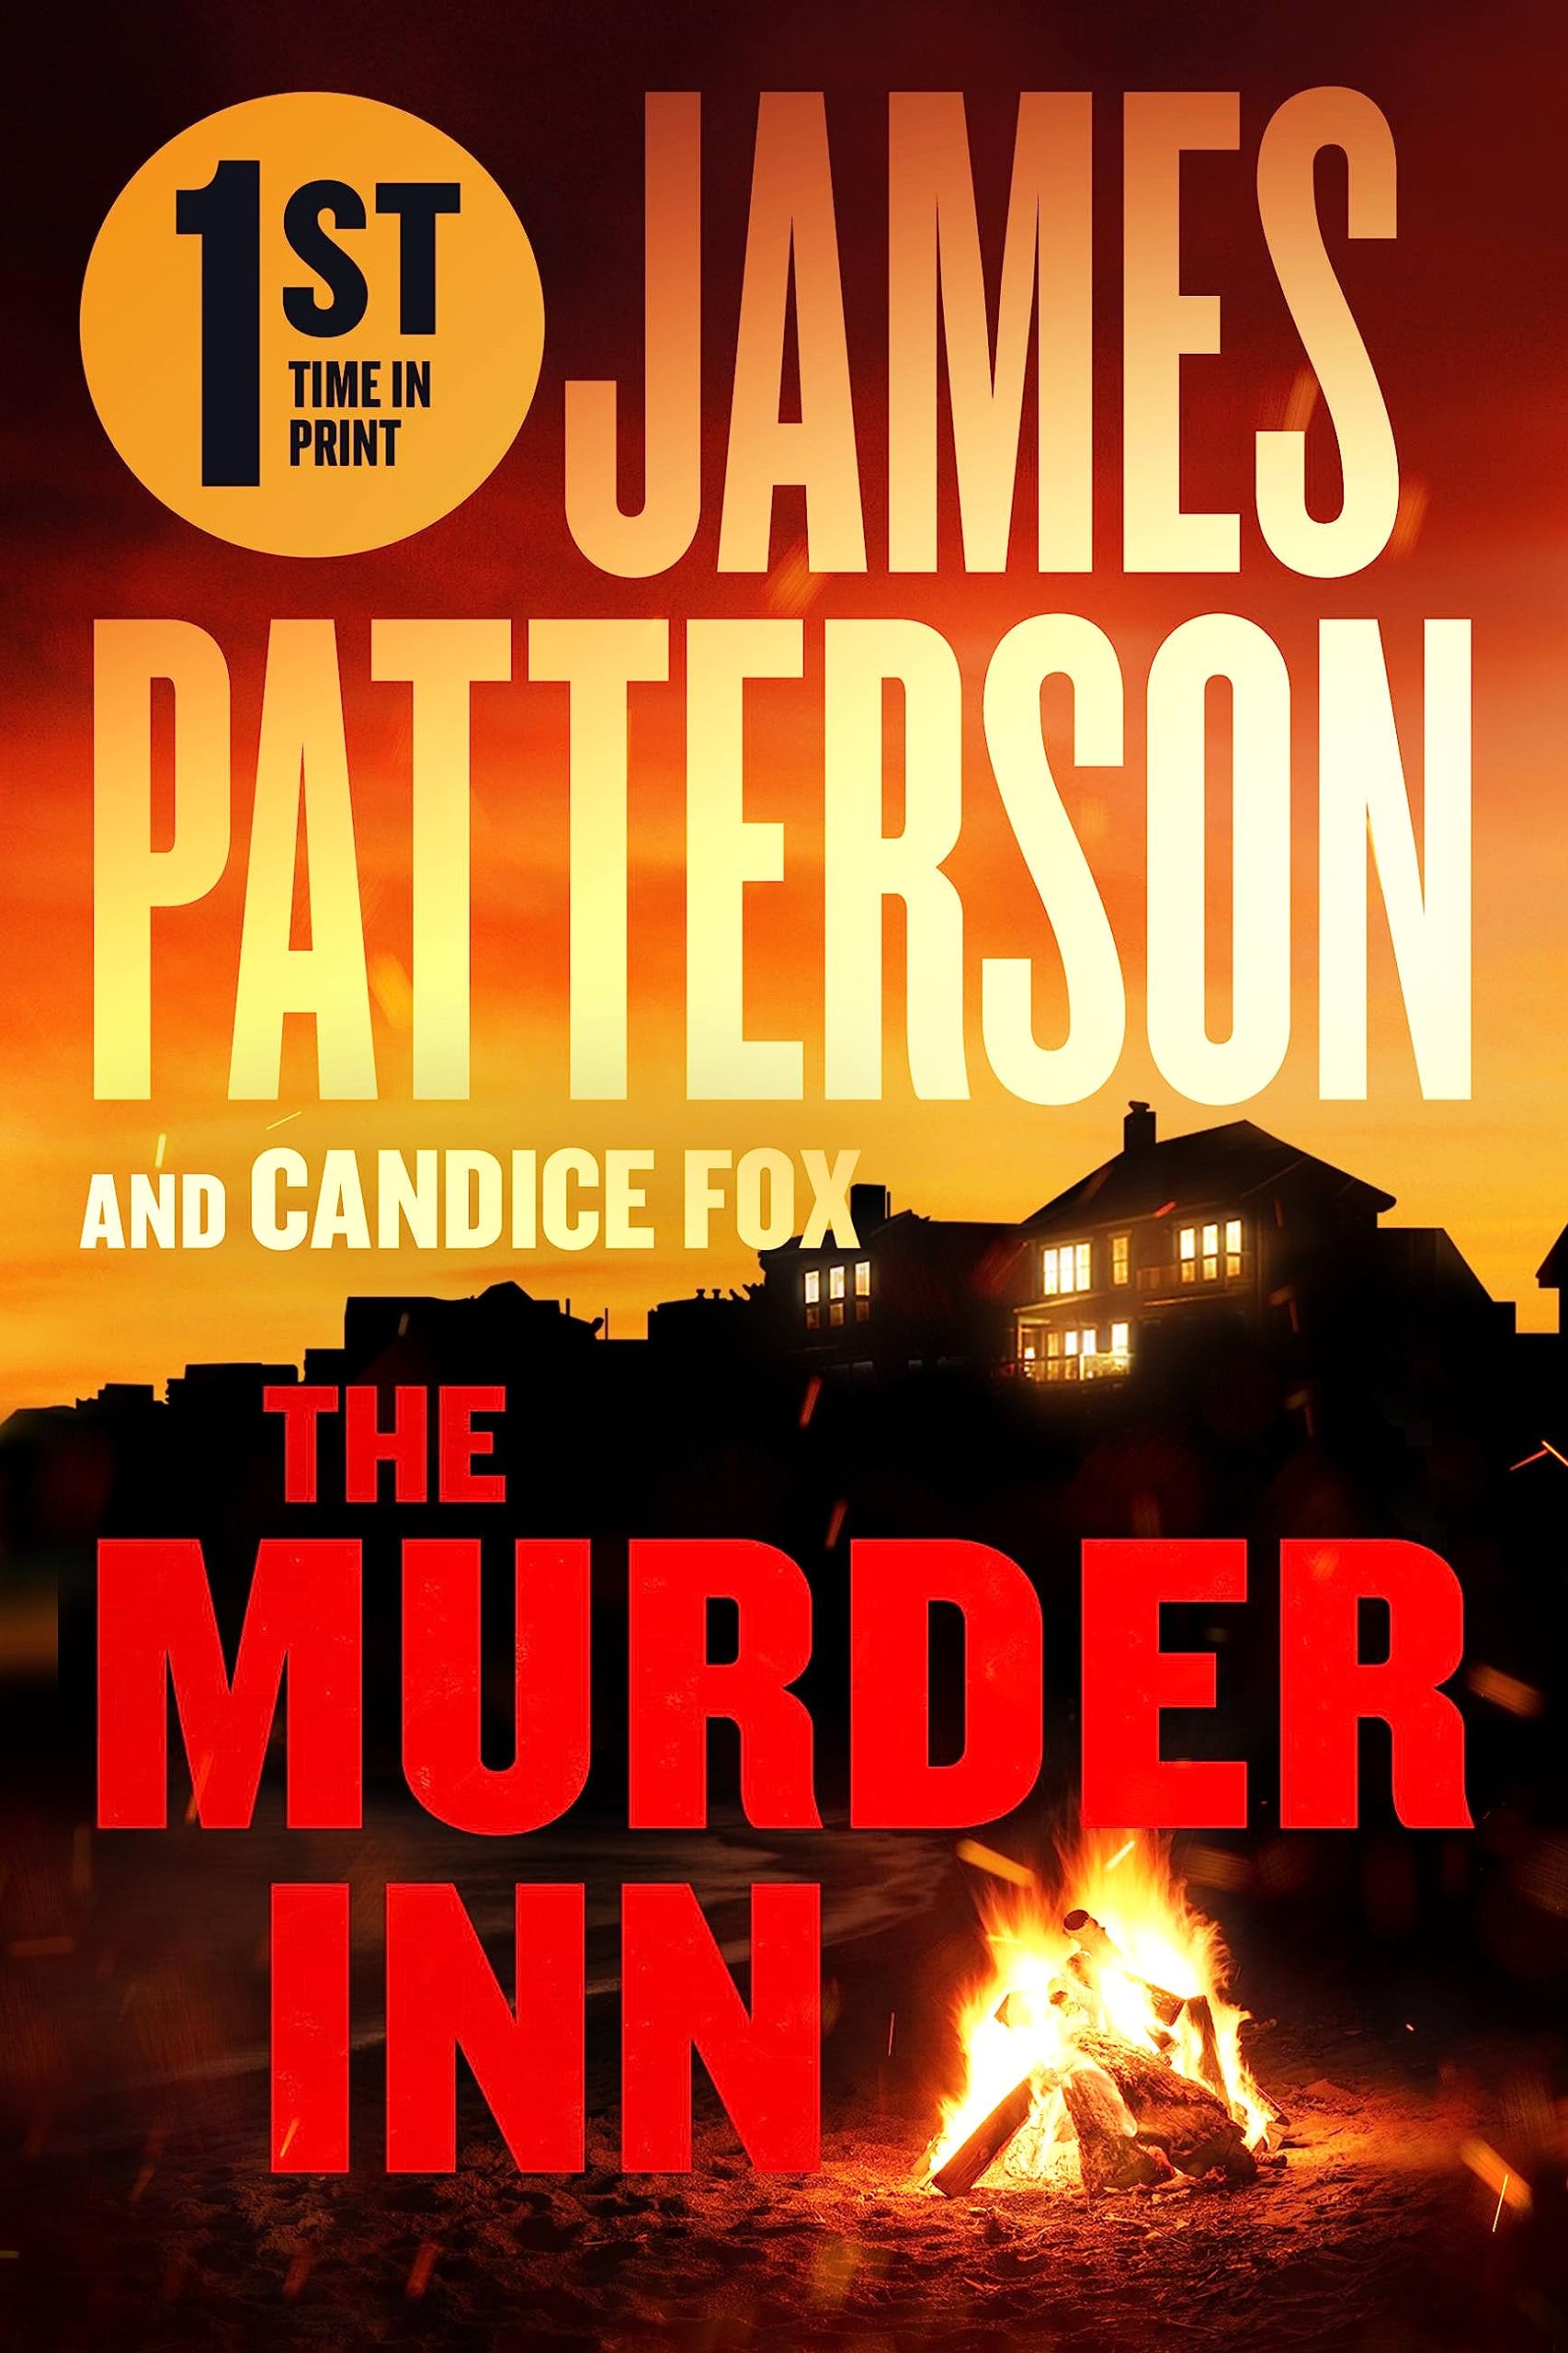 The Murder Inn: From the Author of The Summer House